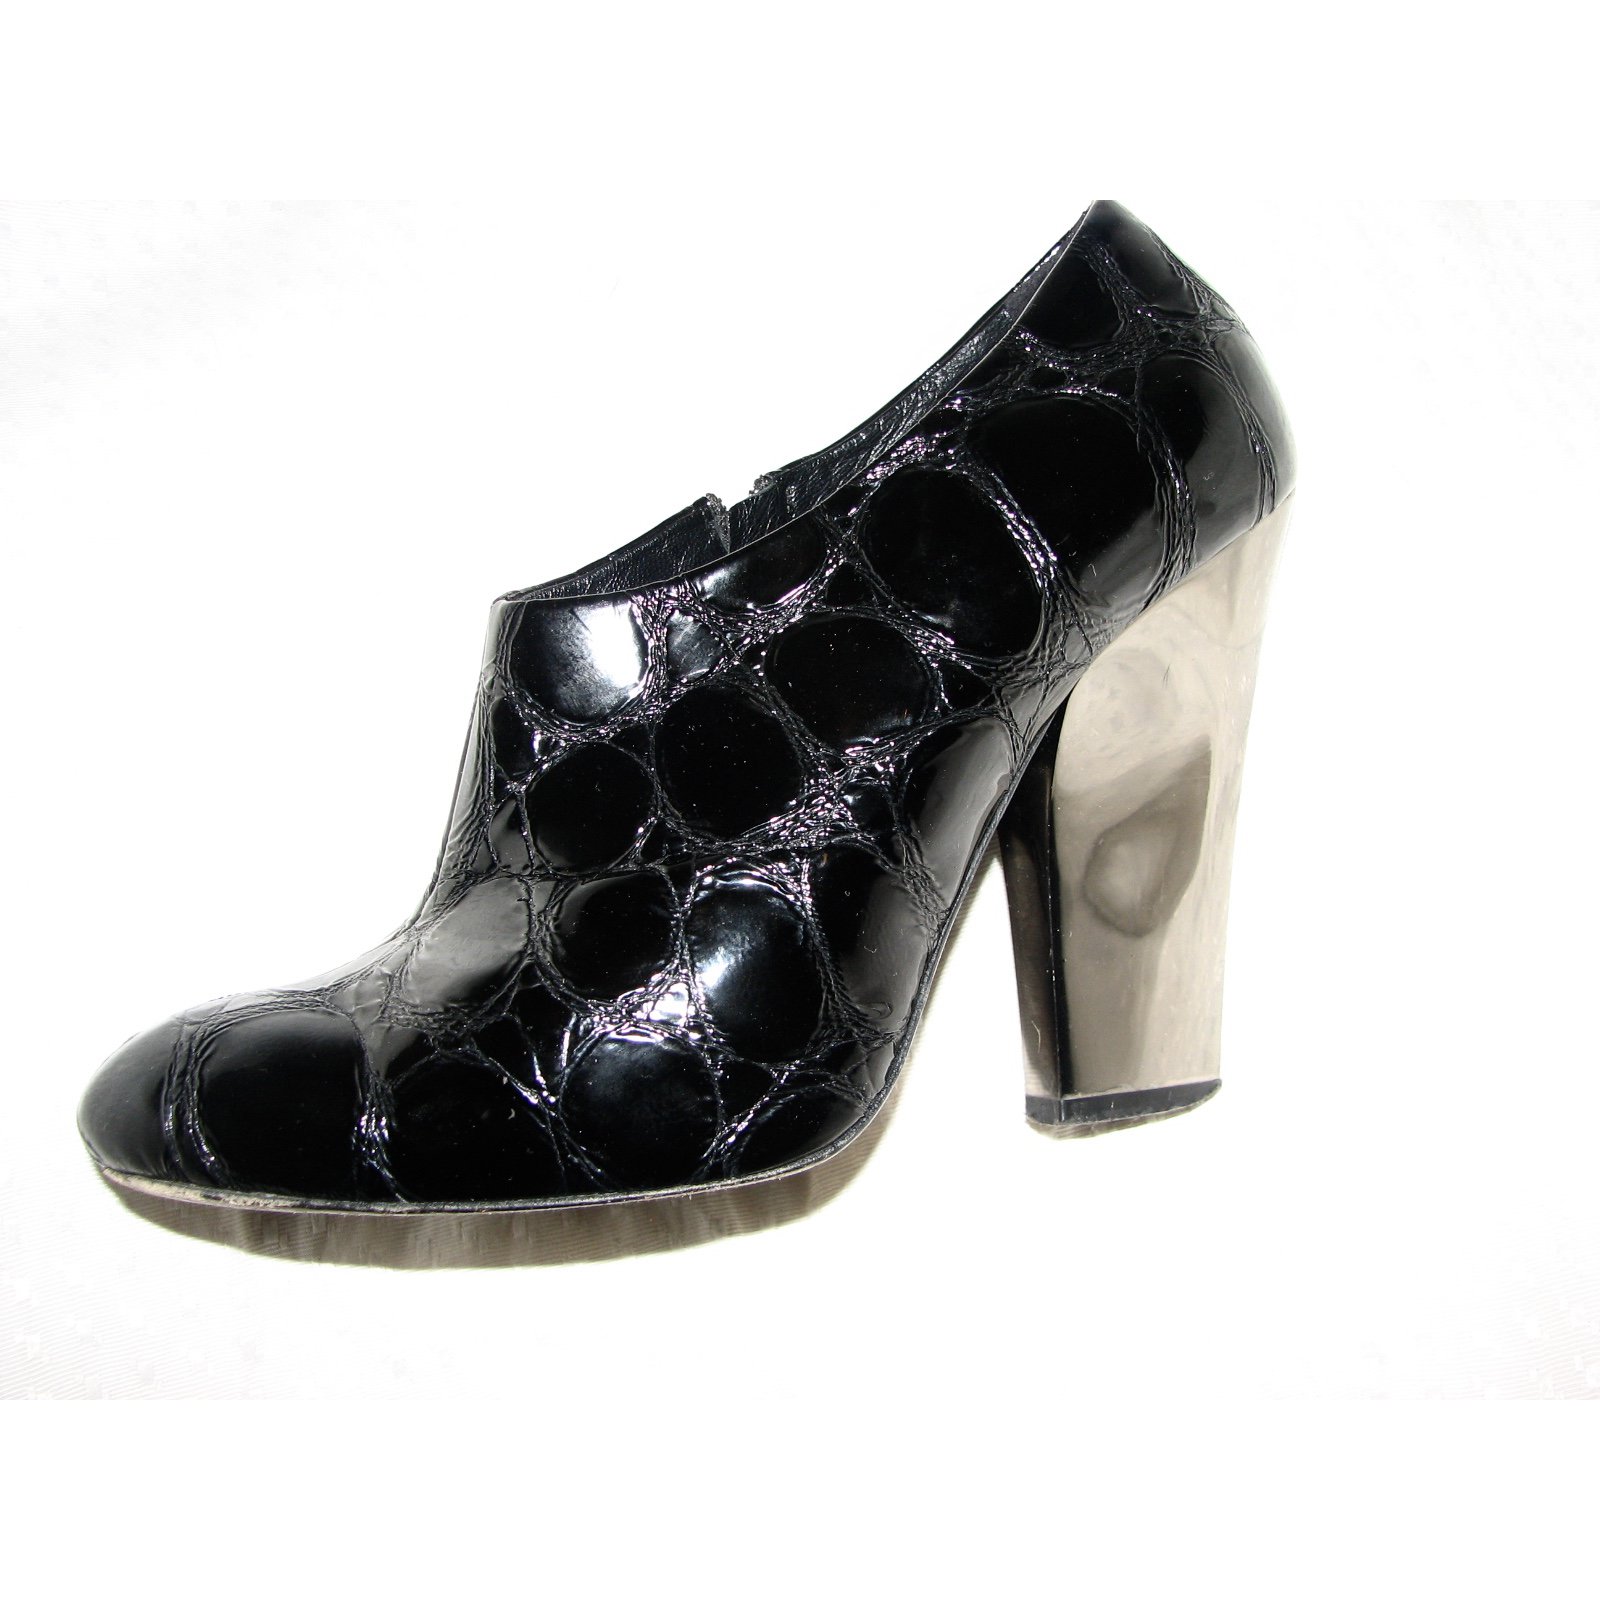 russell and bromley stardust boots